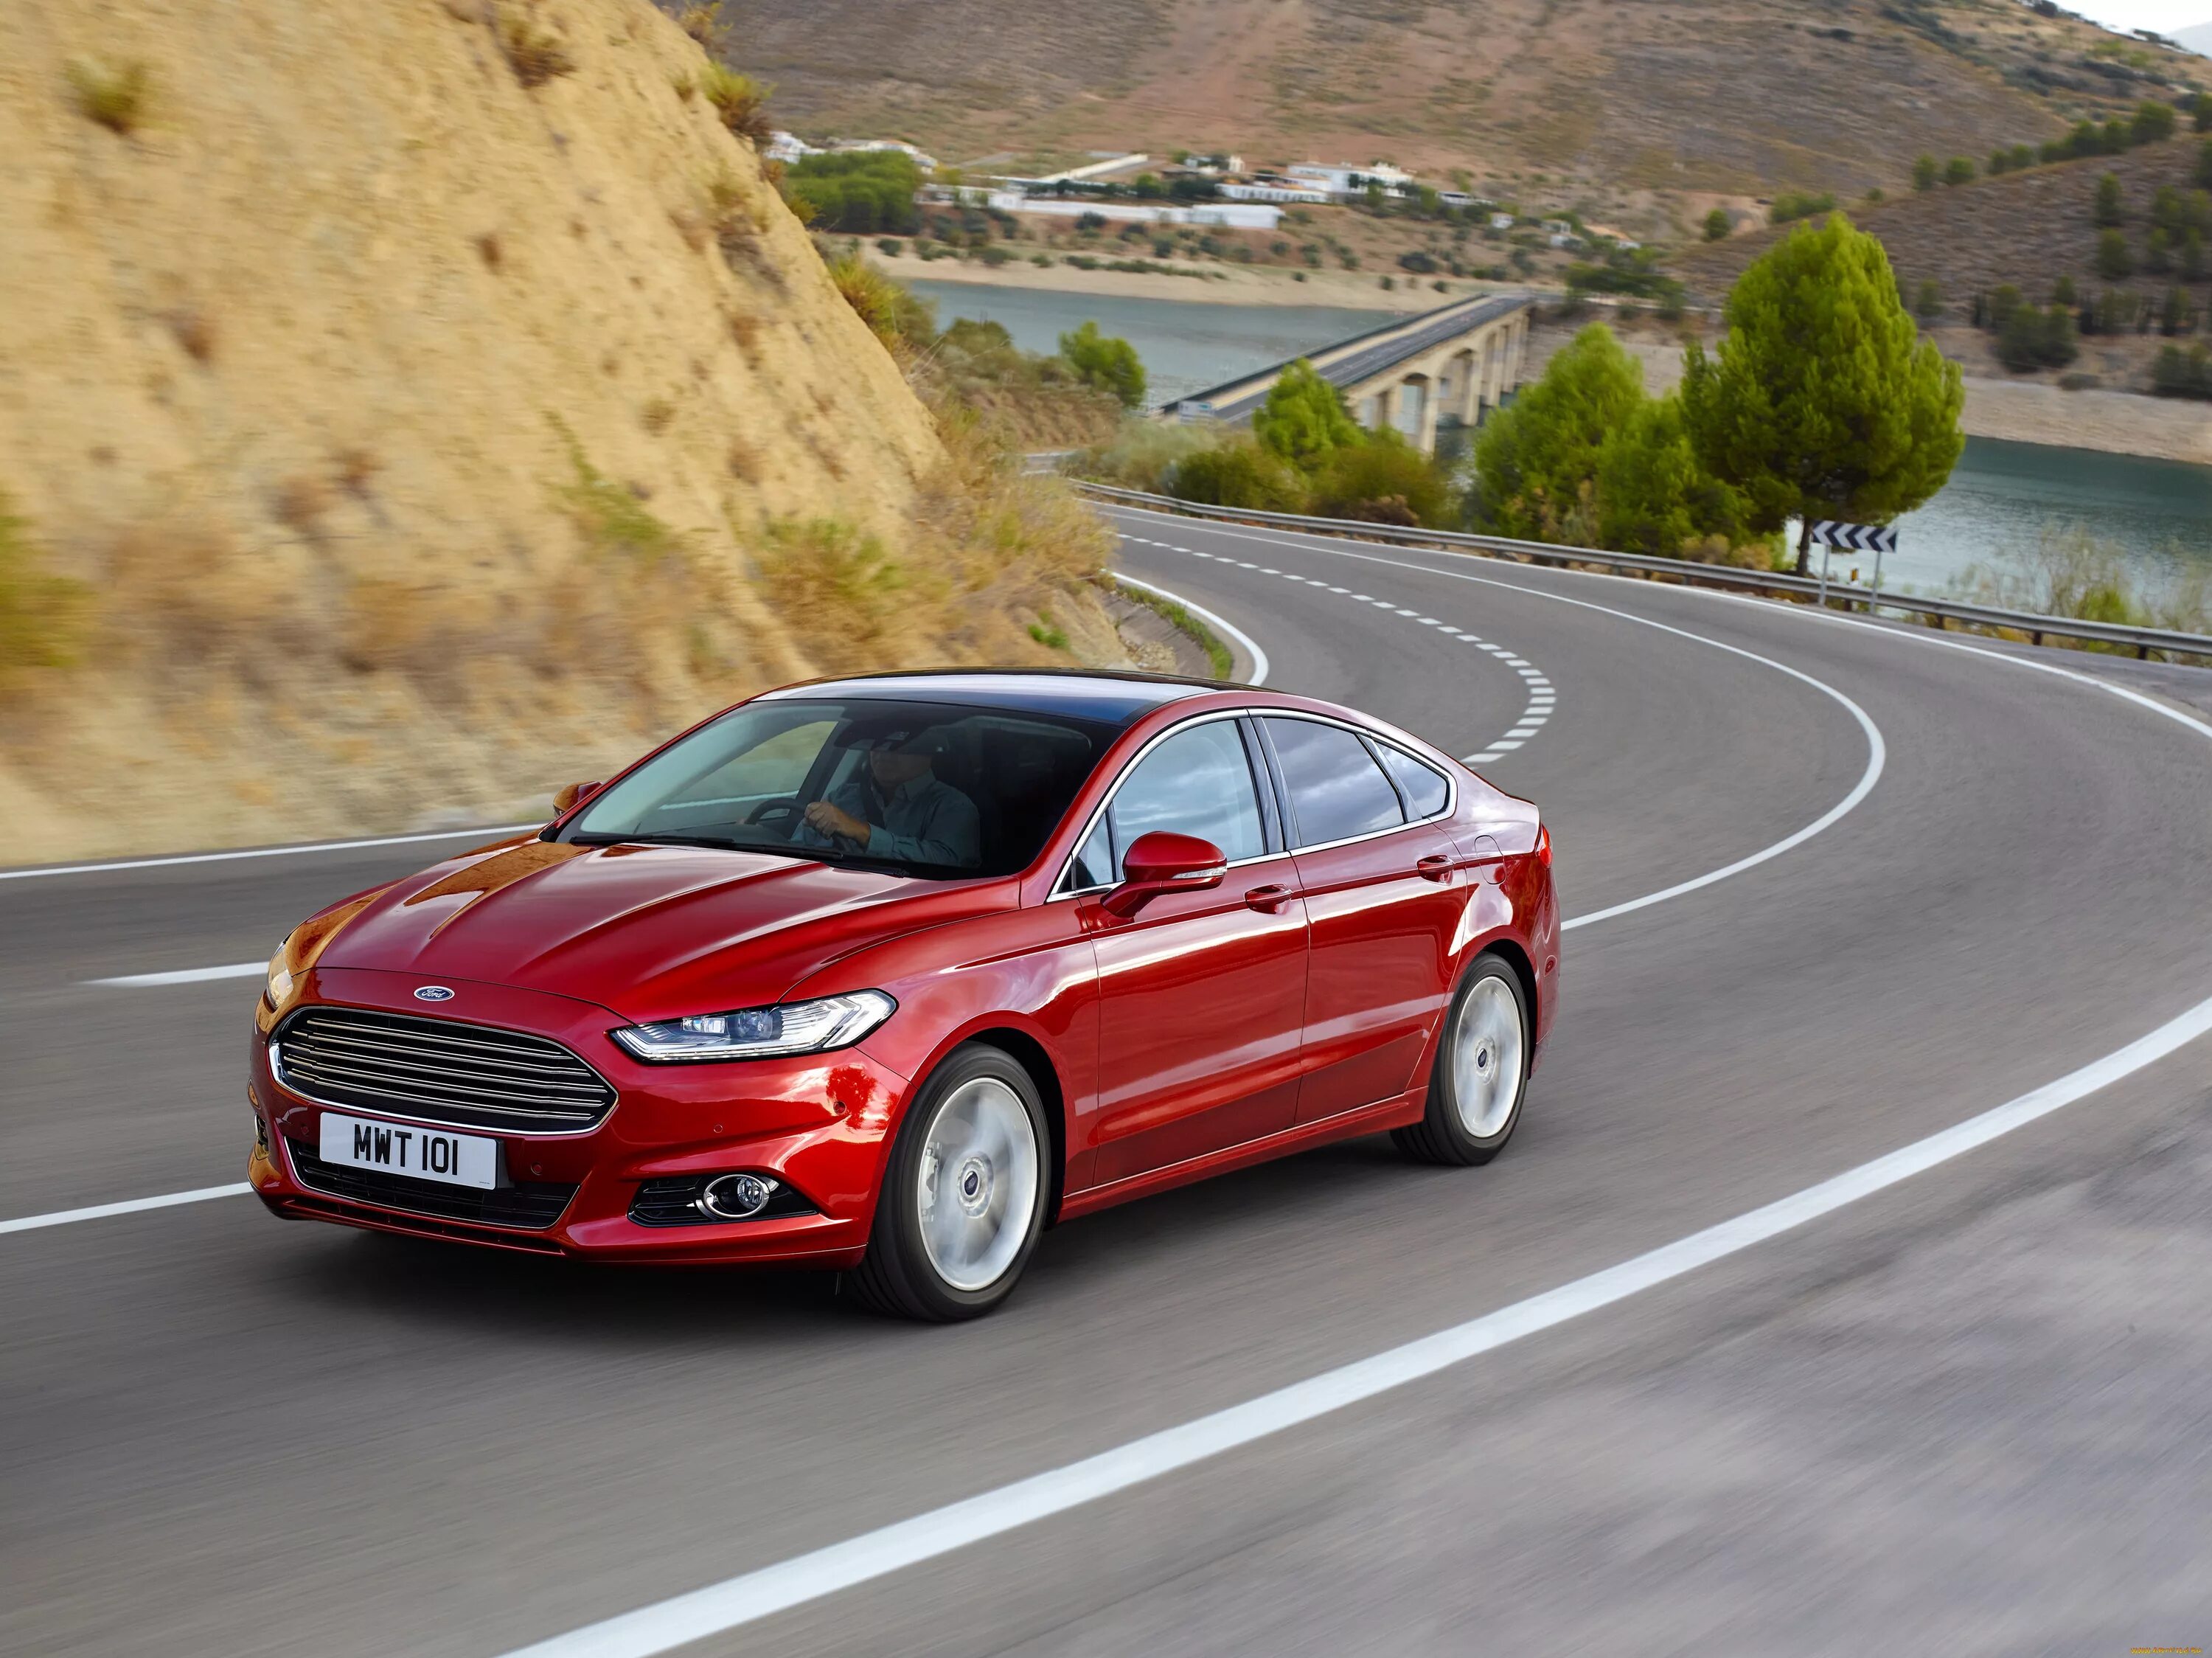 Ford Mondeo 2018. Ford Mondeo 2015. Форд Мондео 5. Ford Mondeo 5 RS. Машина 2015 года выпуска